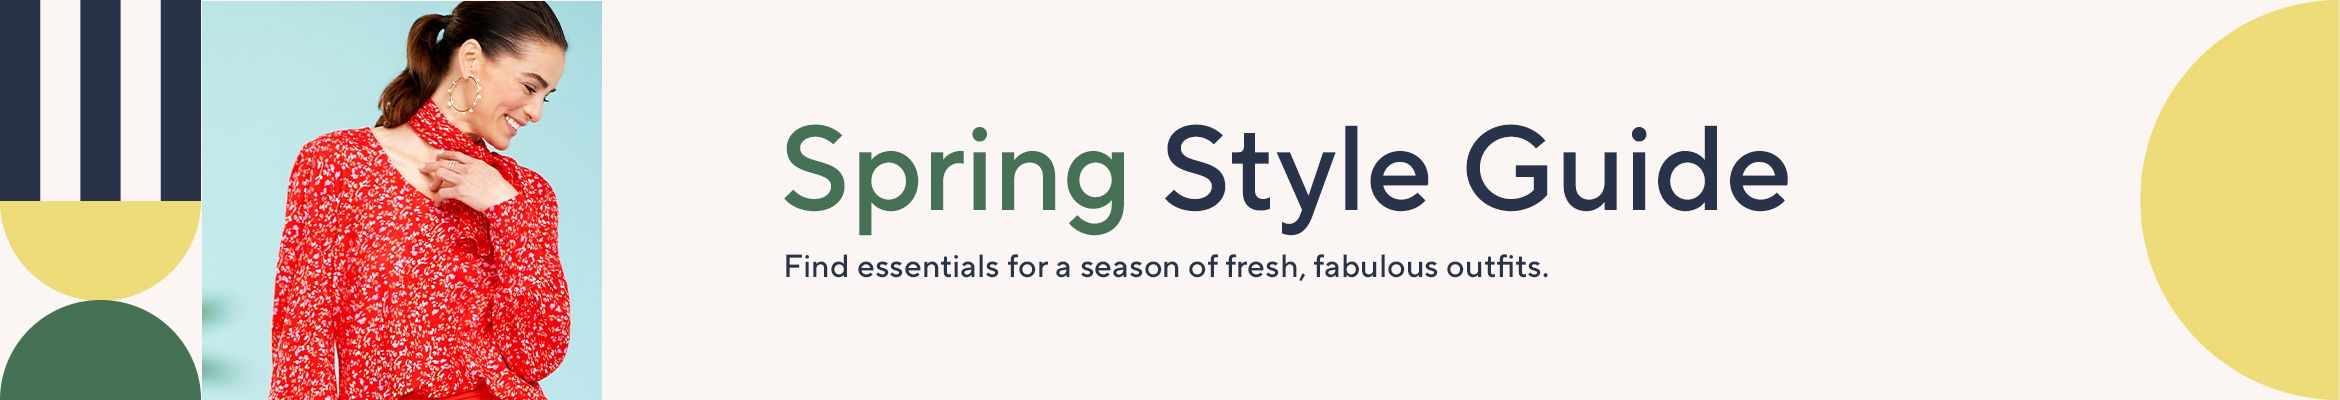 Spring Style Guide: Find essentials for a season of fresh, fabulous outfits.